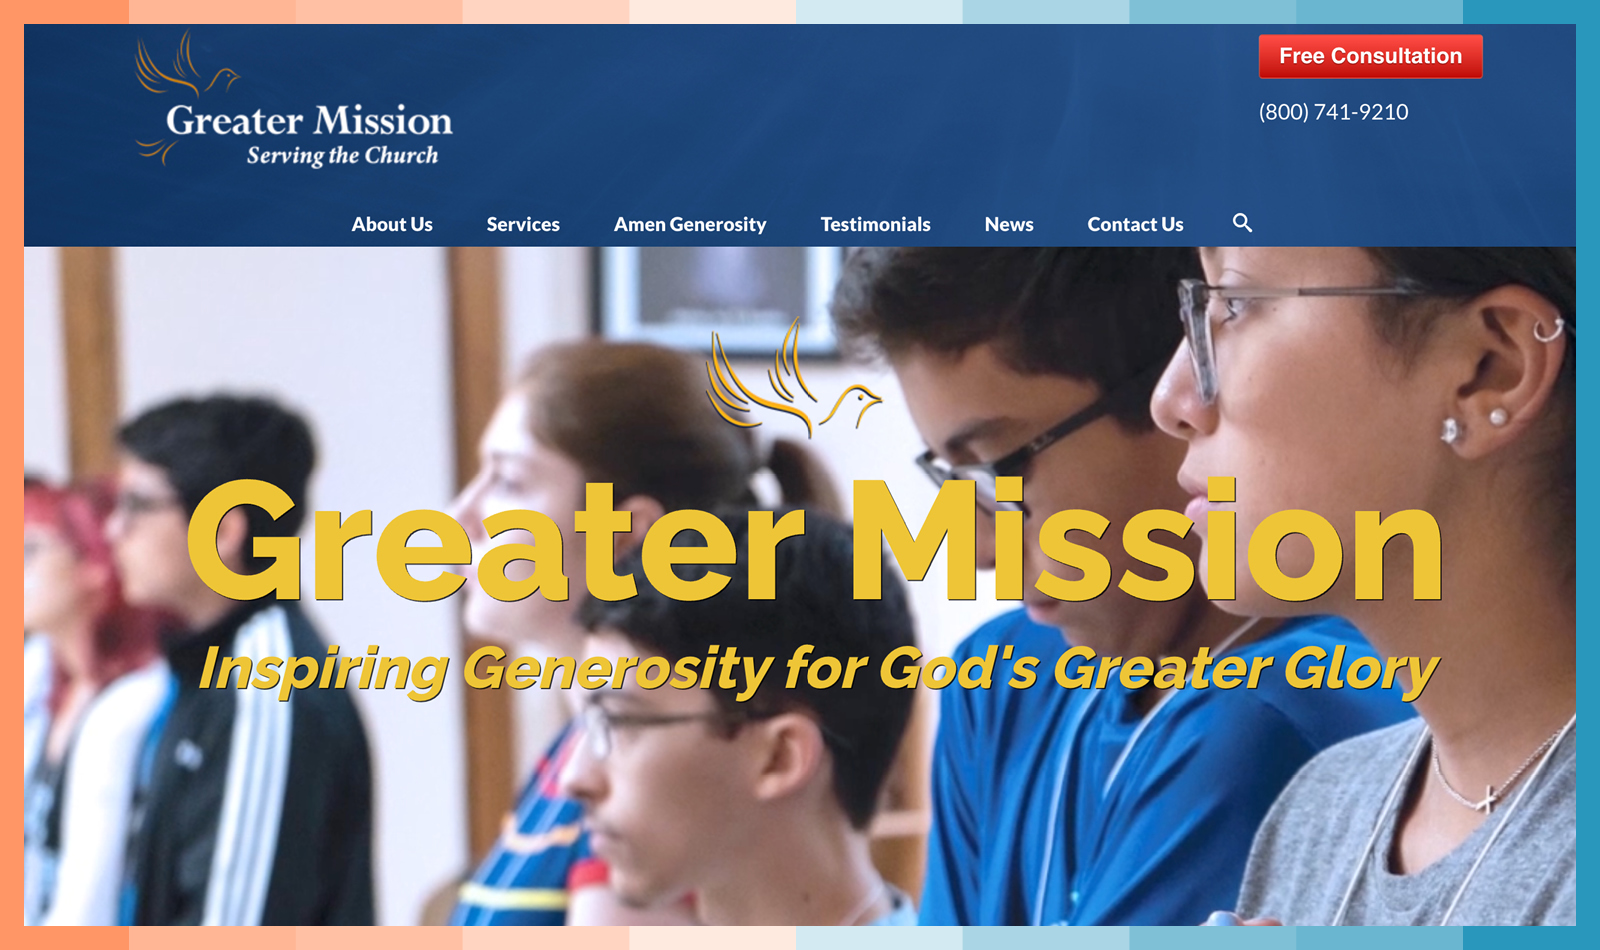 Check out Greater Mission's fundraising consulting firm to learn how they inspire faith-filled generosity.